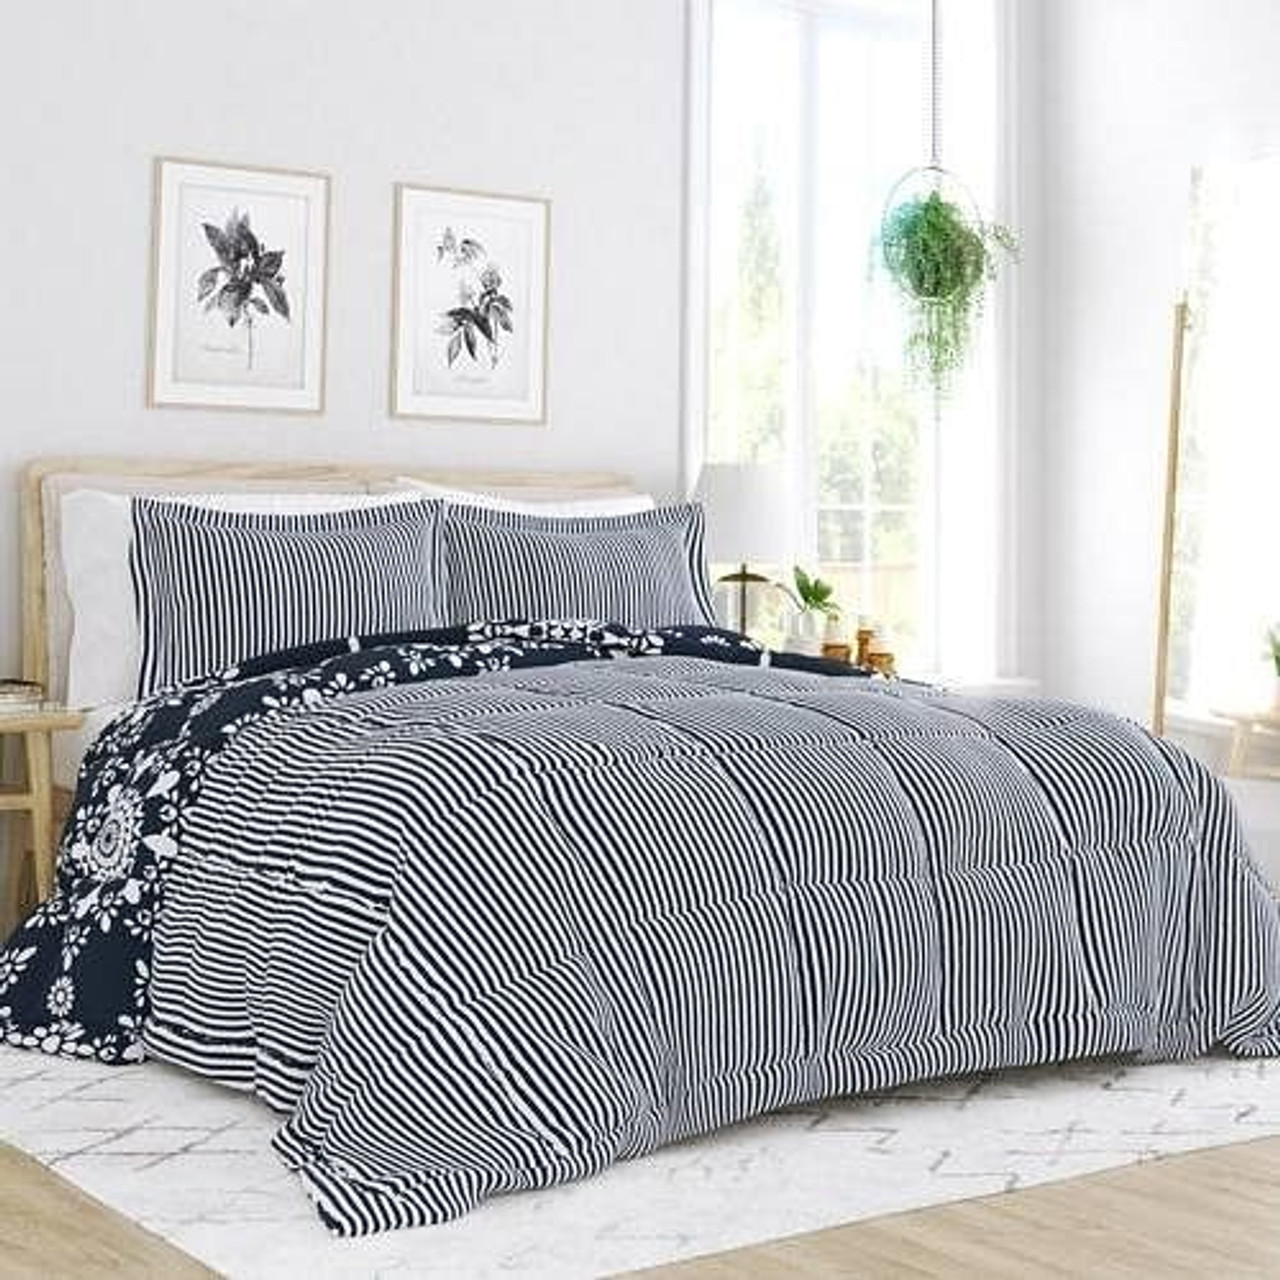 Full/Queen size 3-Piece Navy Blue White Reversible Floral Striped Comforter Set